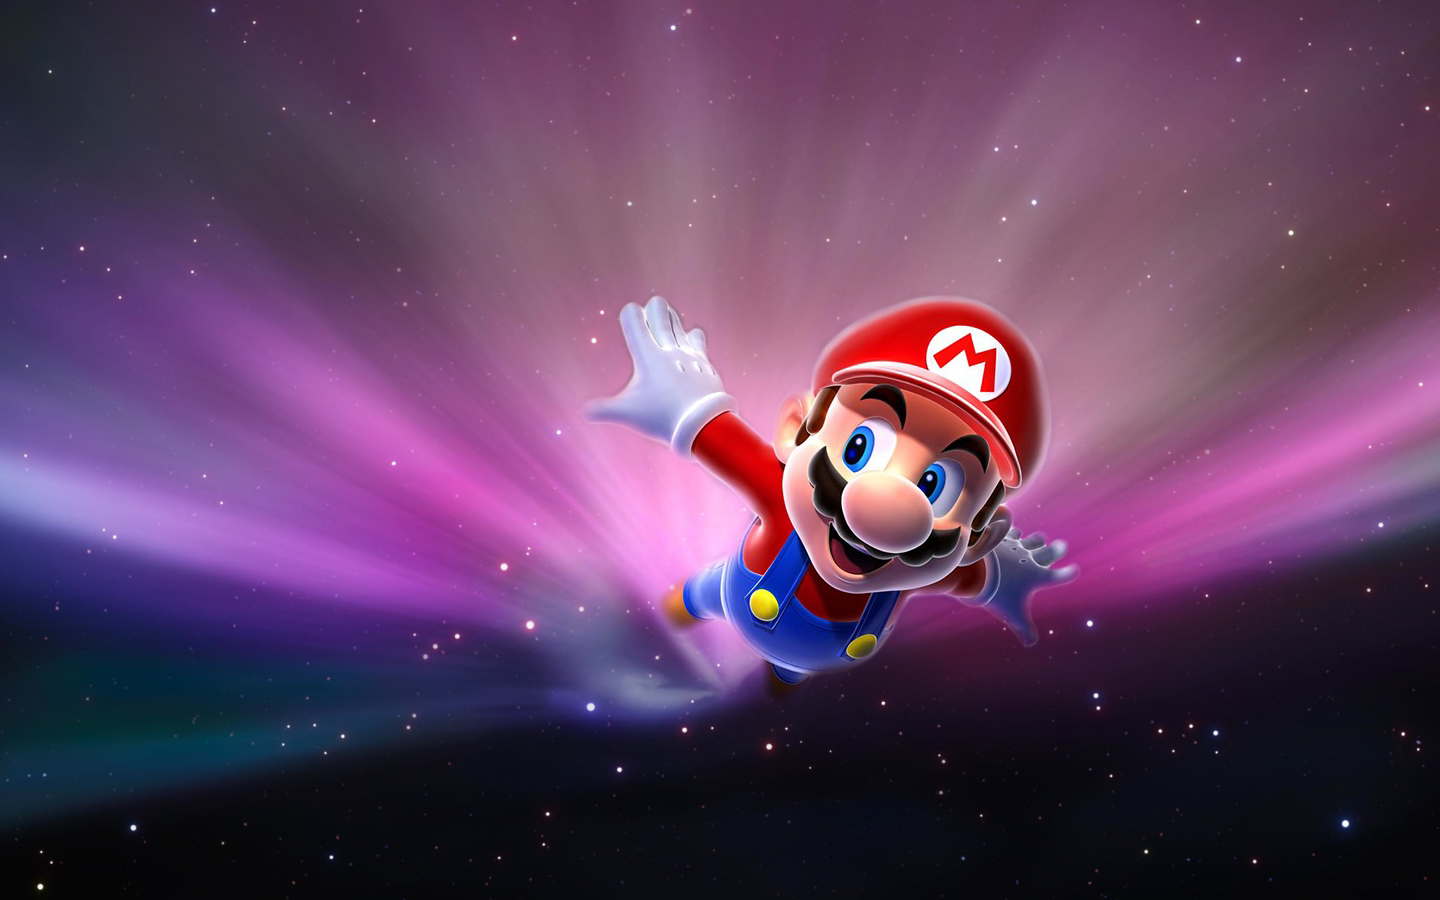 theme wallpaper free,animated cartoon,space,mario,outer space,graphic design